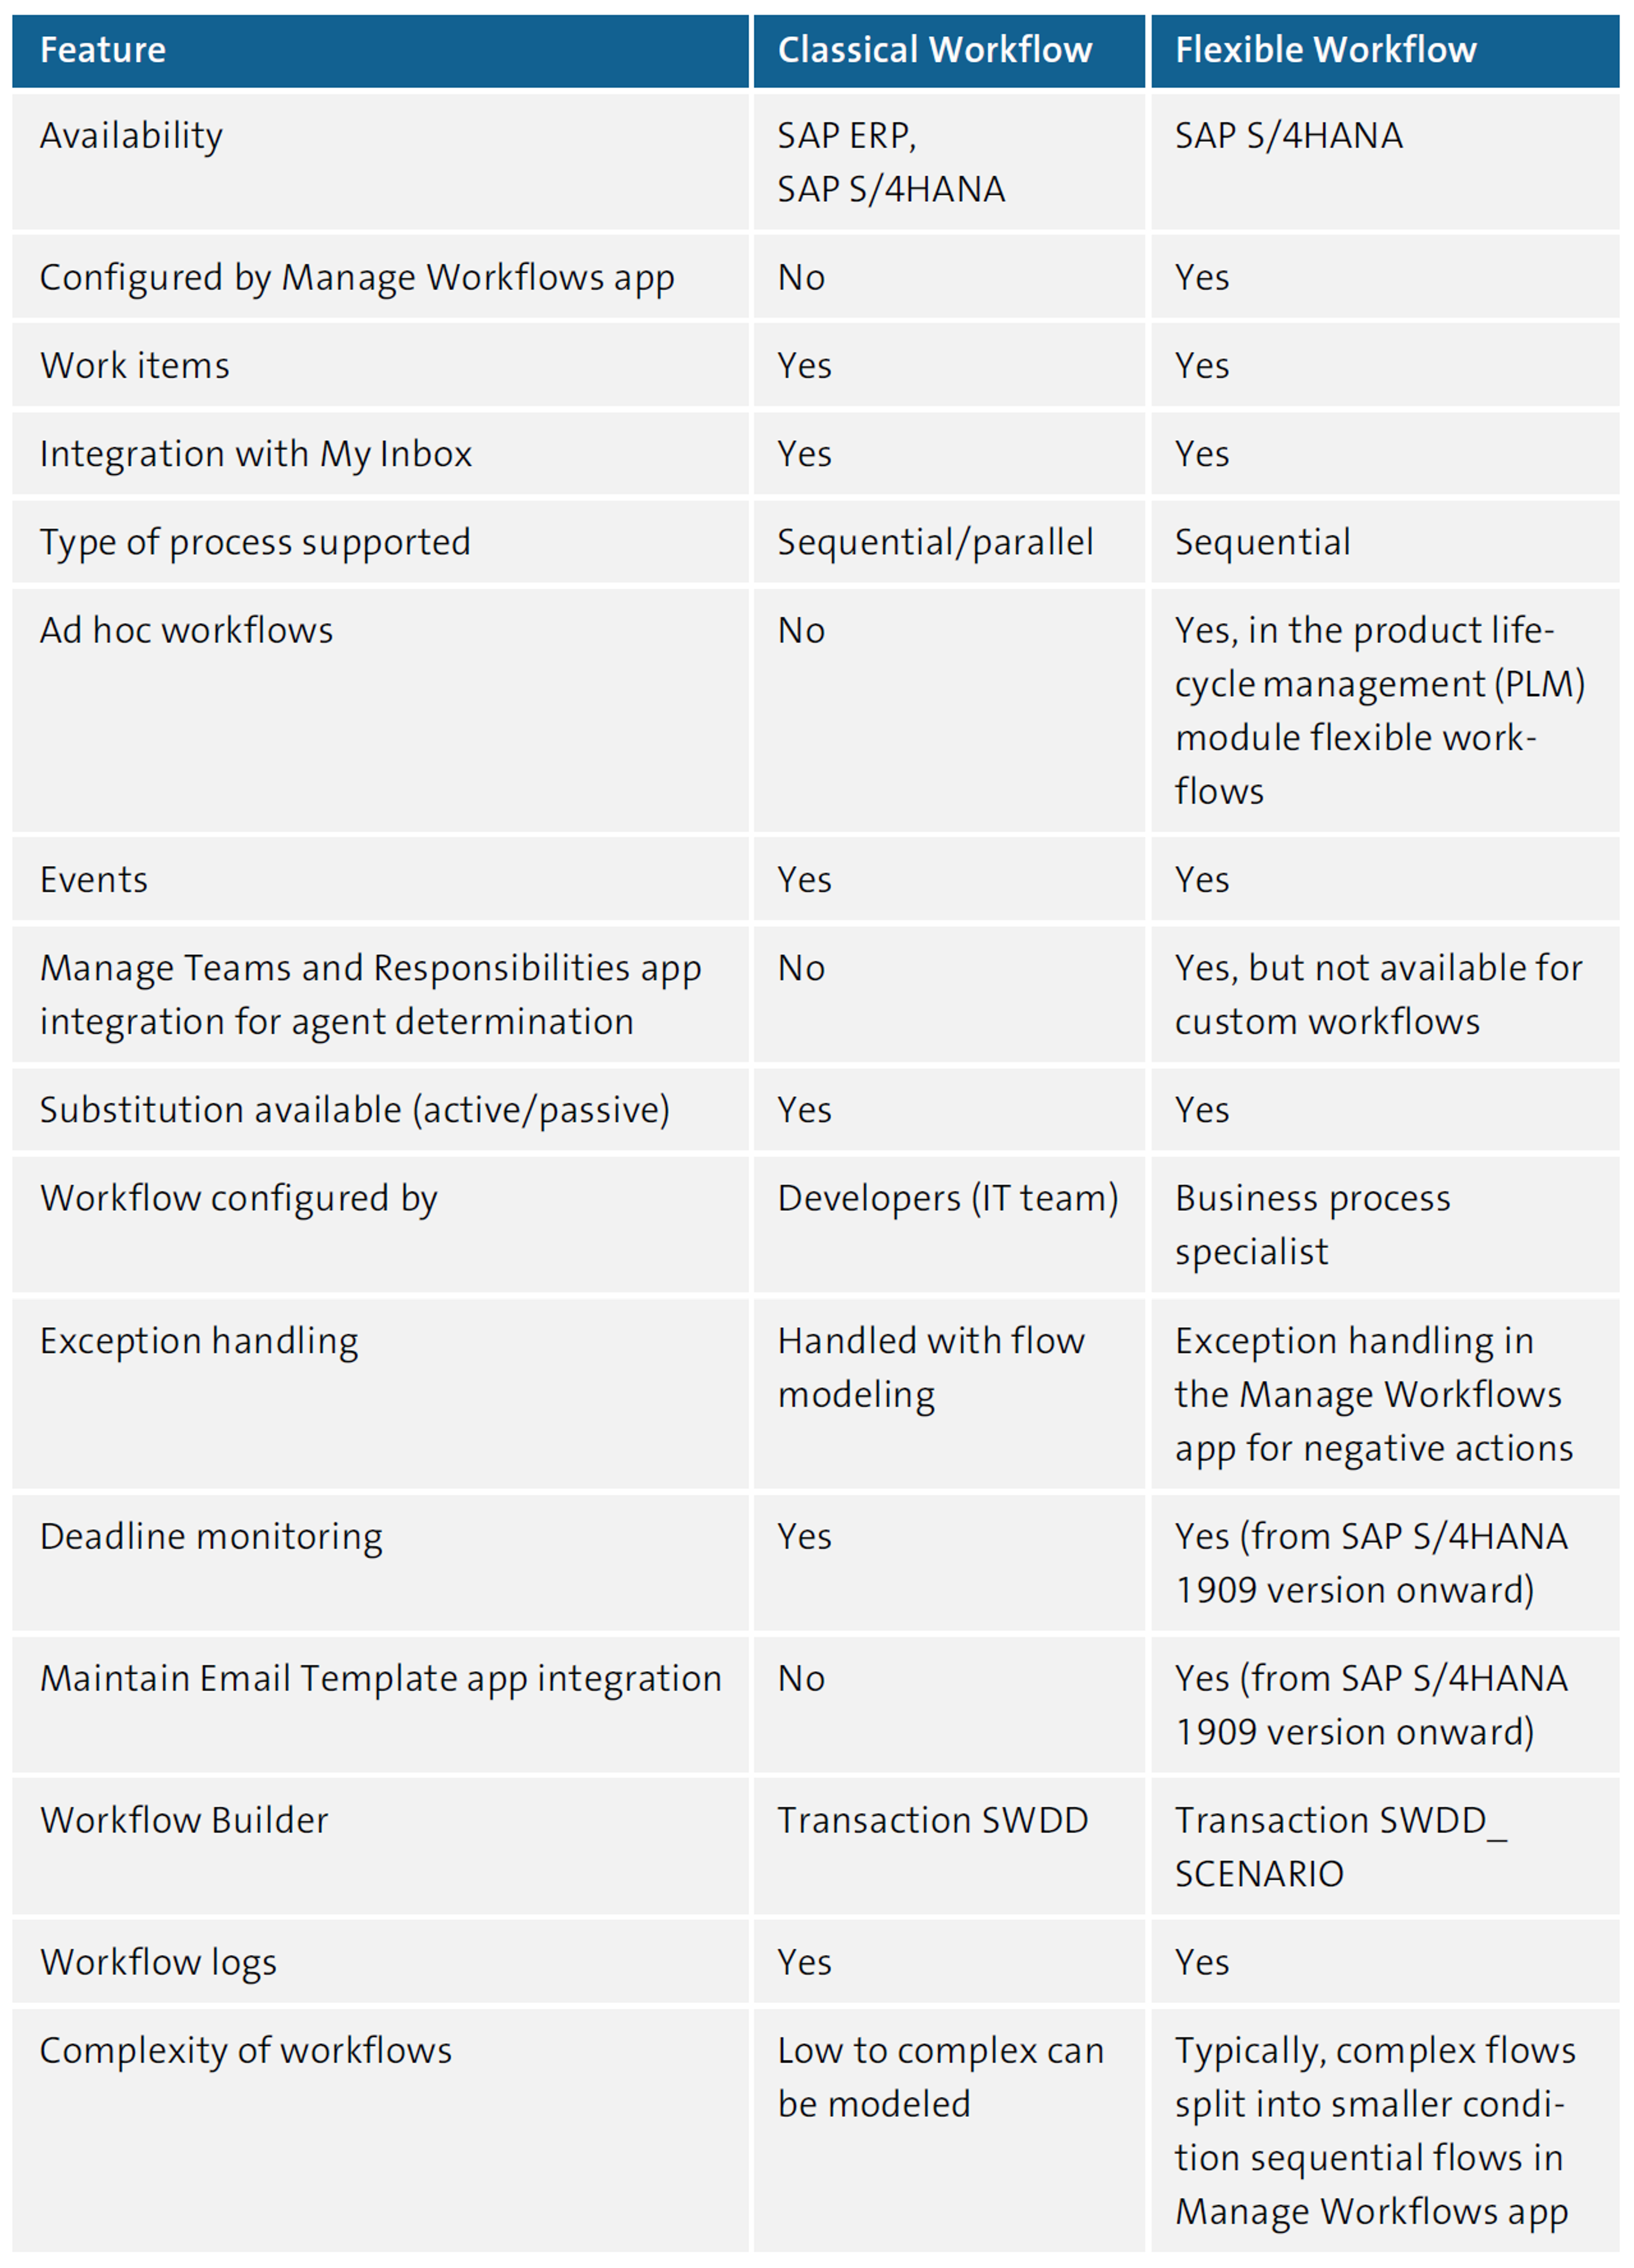 Comparison between Classical and Flexible Workflows